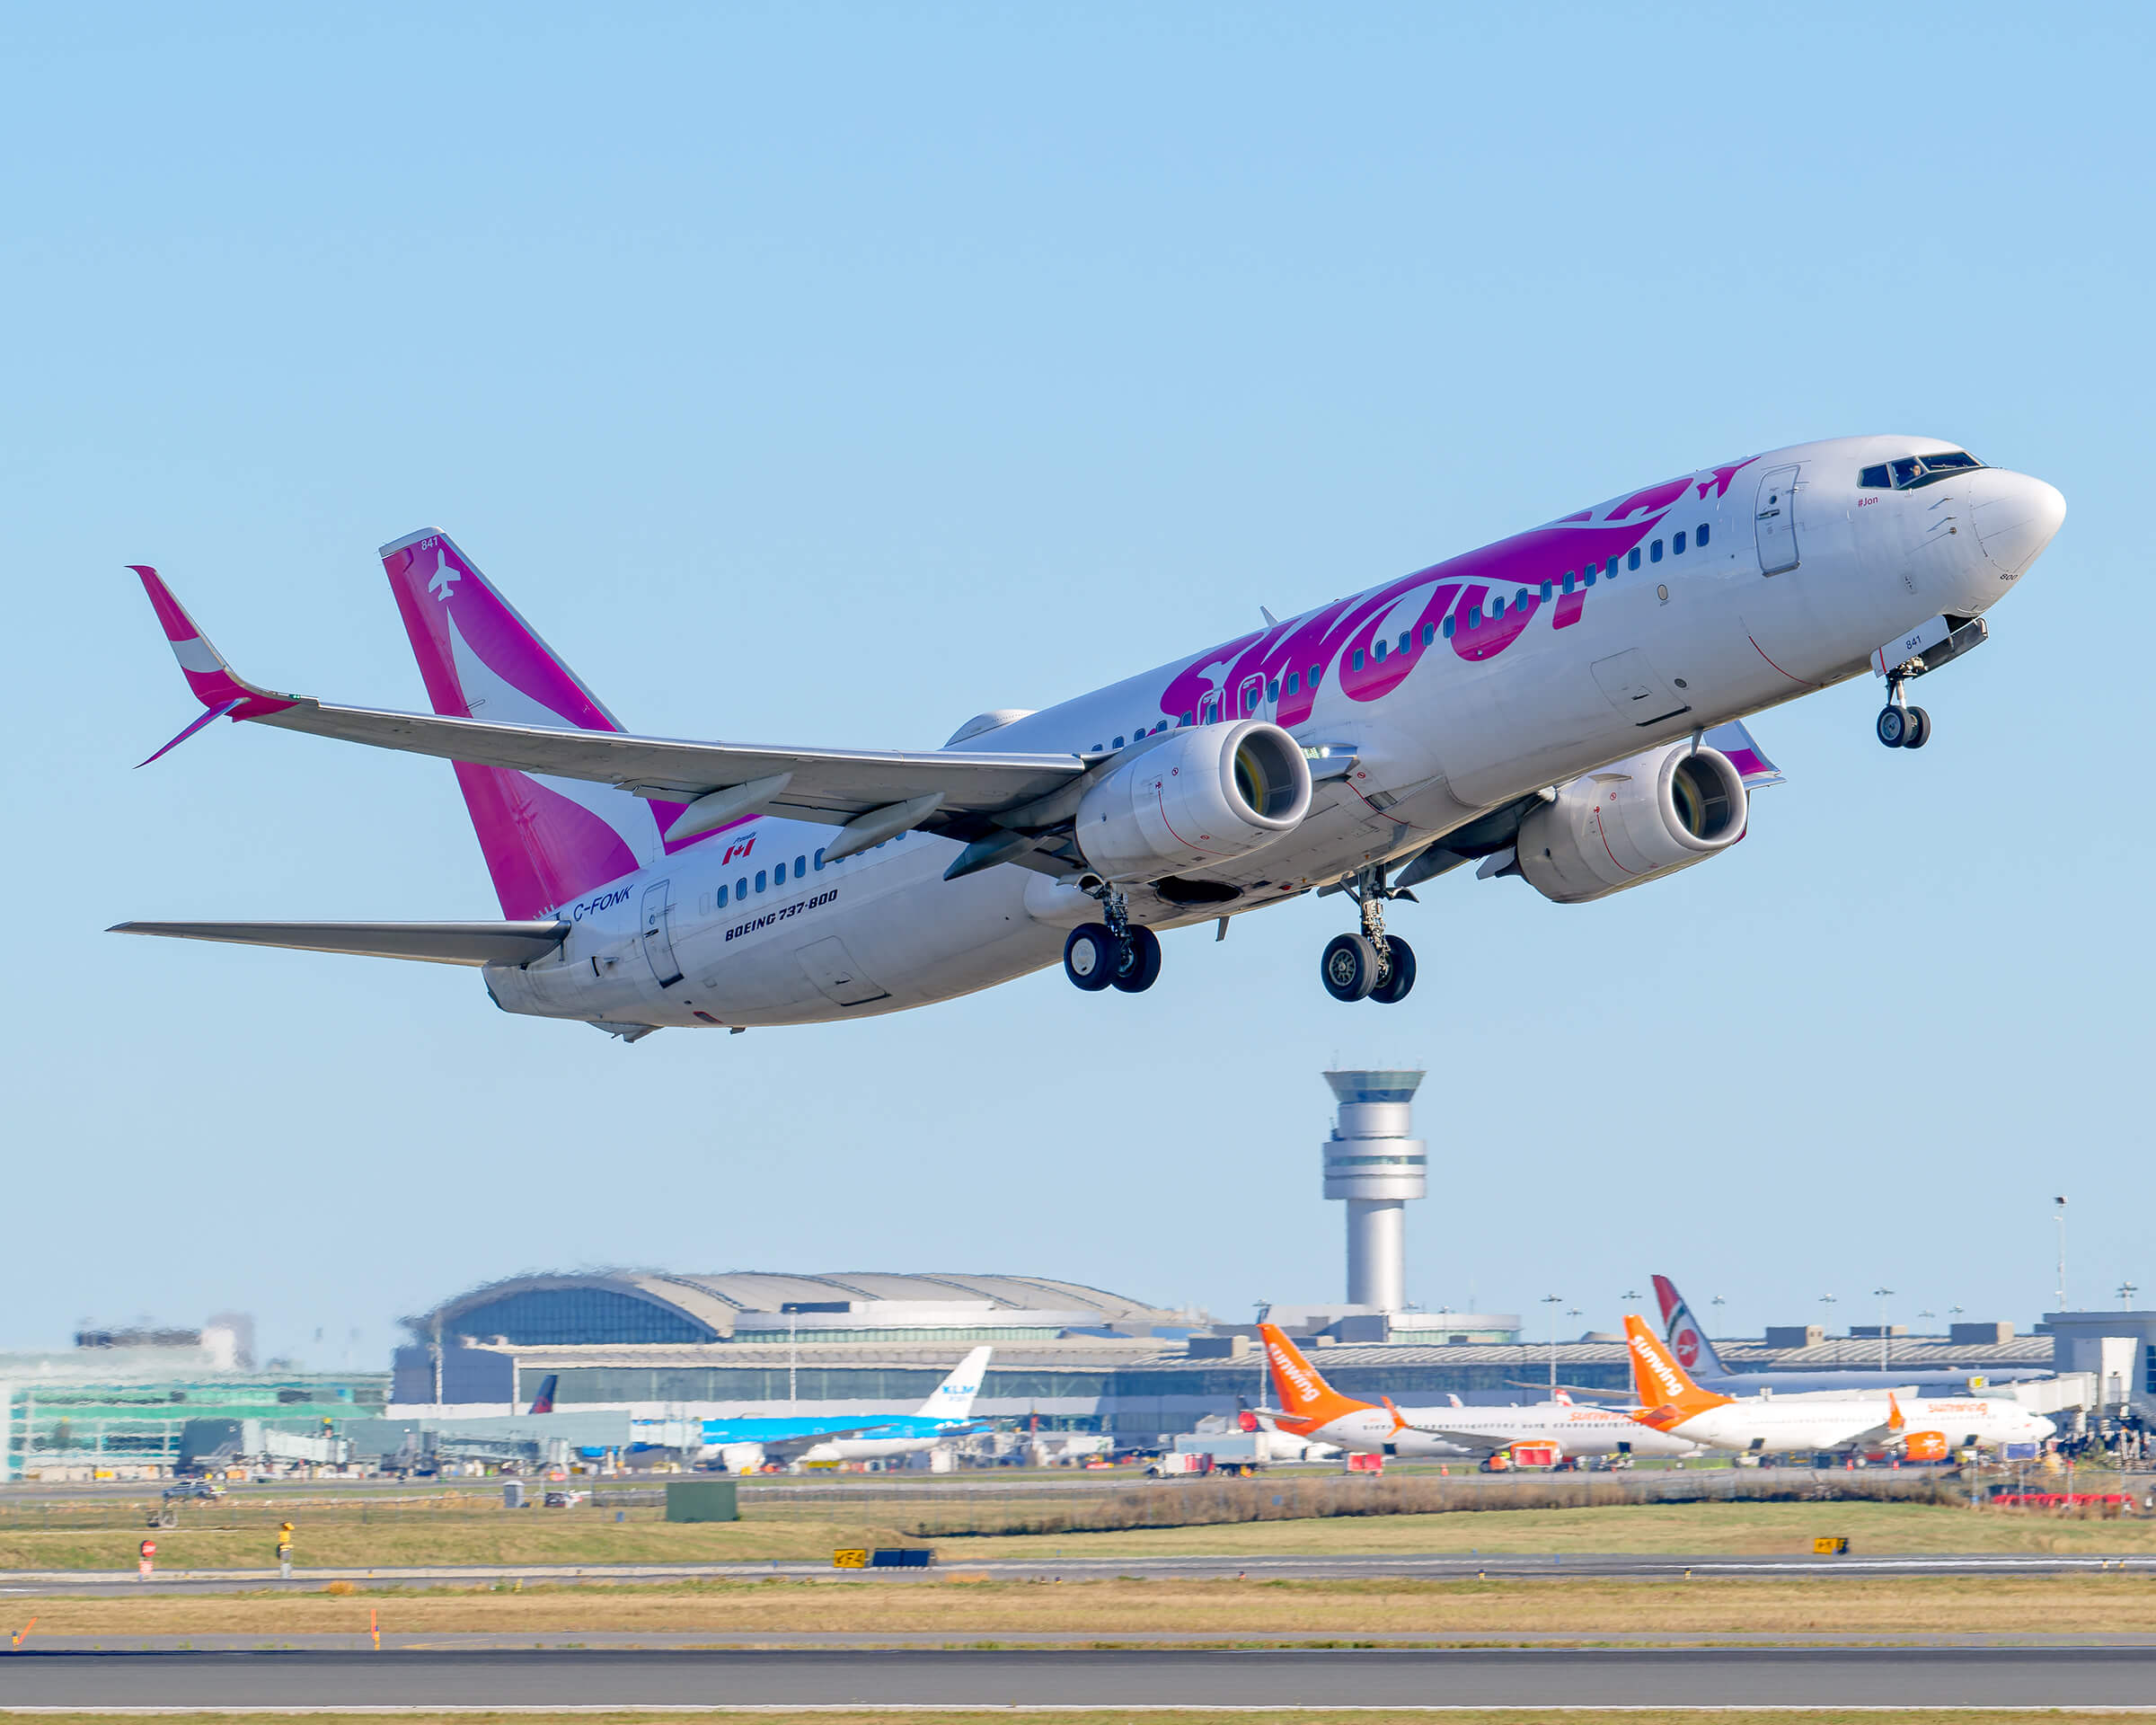 Canadian Low Cost Airline SWOOP Ends Operations, All Flights